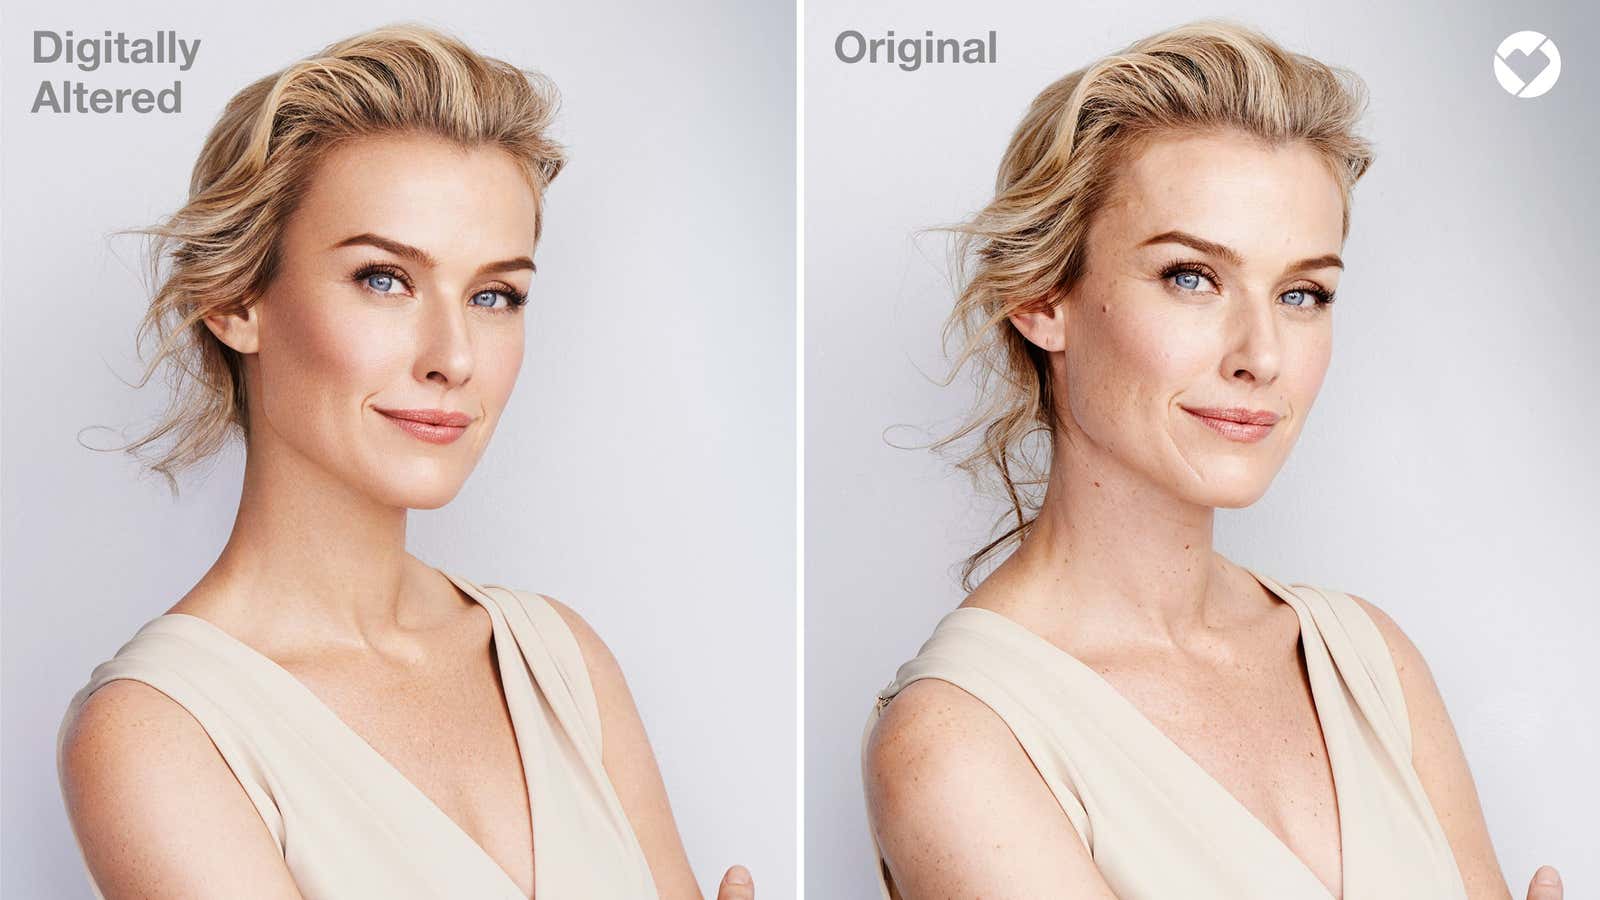 An example from a previous CVS campaign where the digitally altered photo was used, and the original image, now with the CVS Beauty Mark.